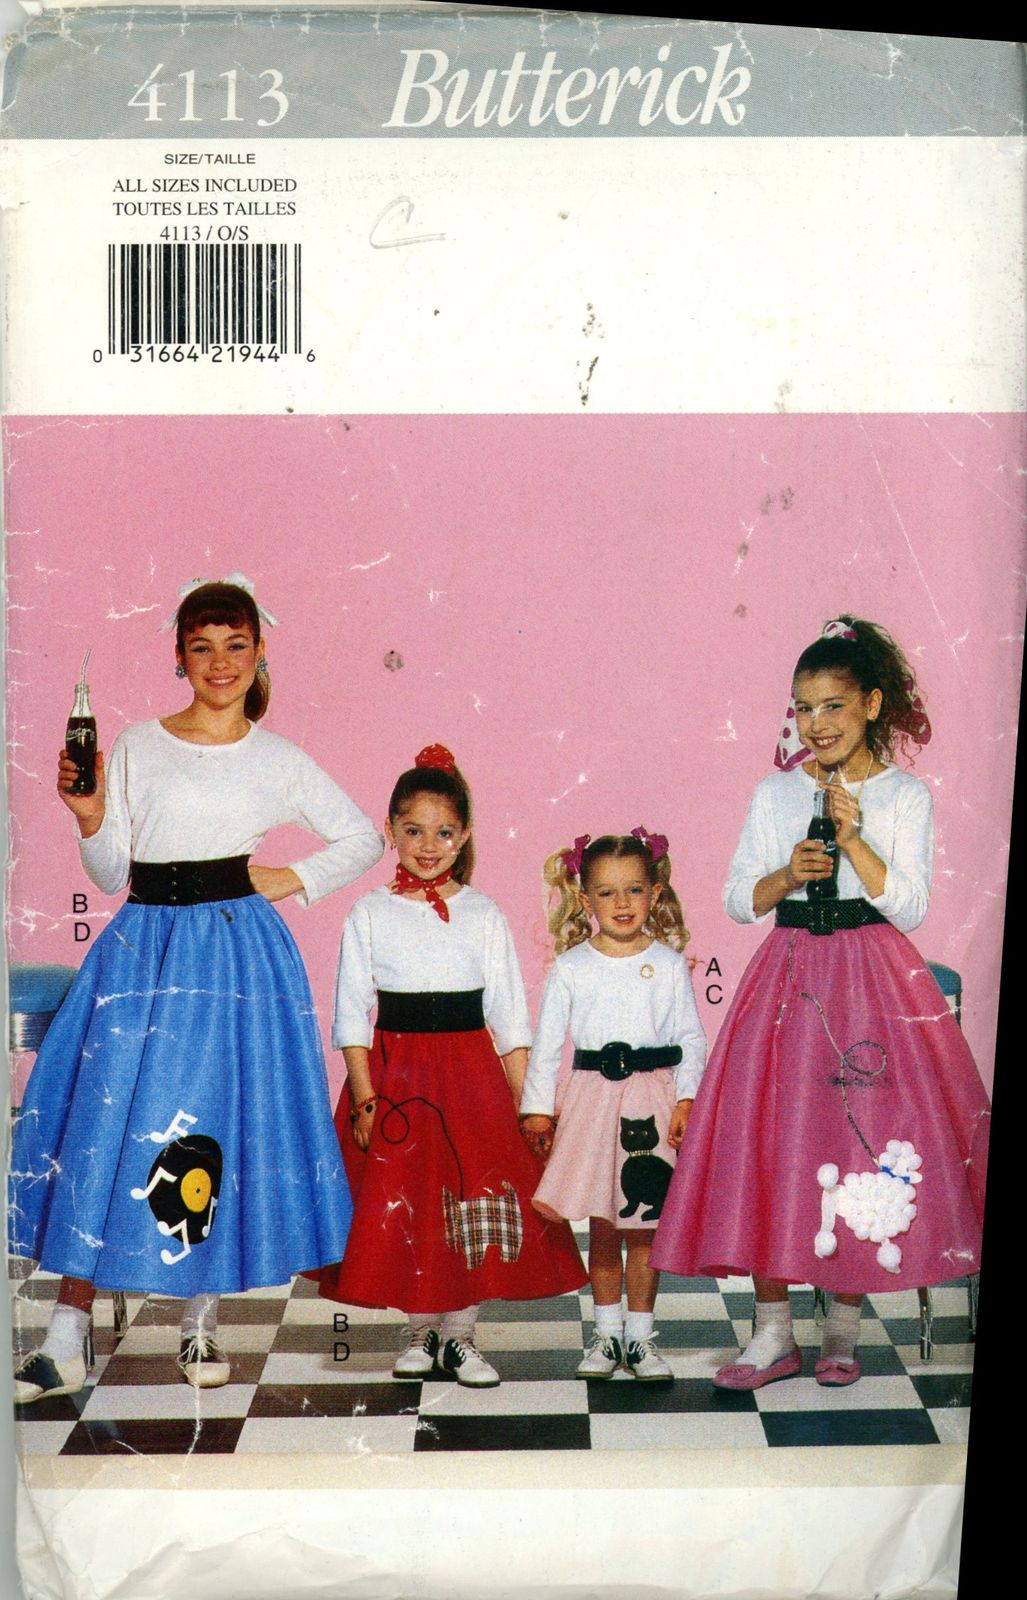 Primary image for Butterick 4113 Poodle Skirts and Petticoats  Cut Size Girl 4-5 